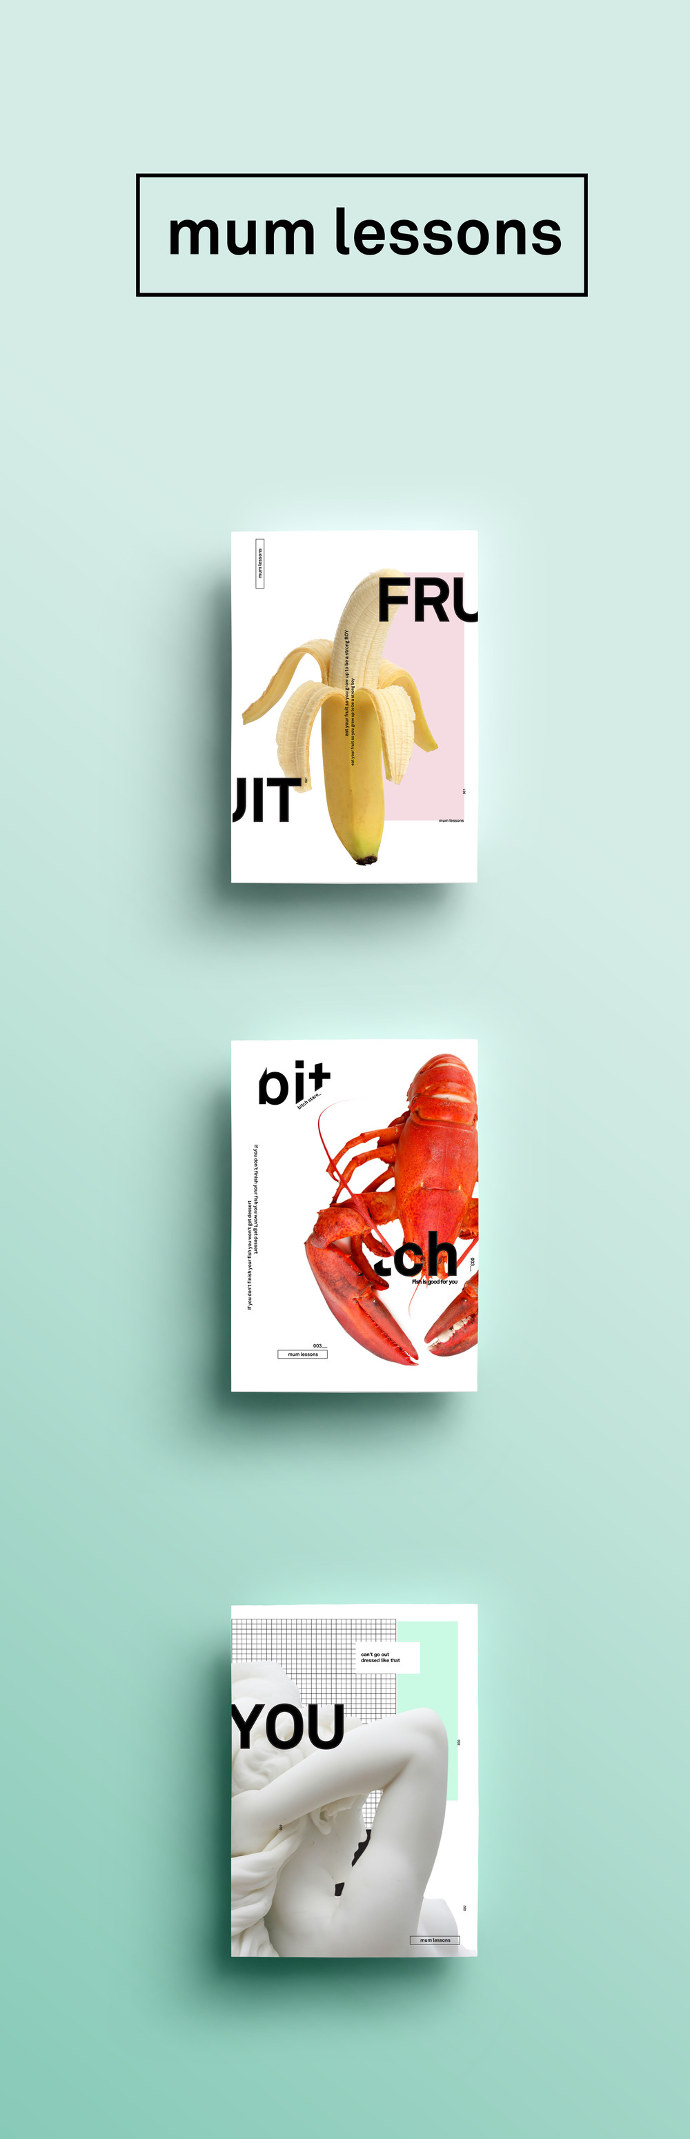 Graphic design and art direction by Caterina Bianchini